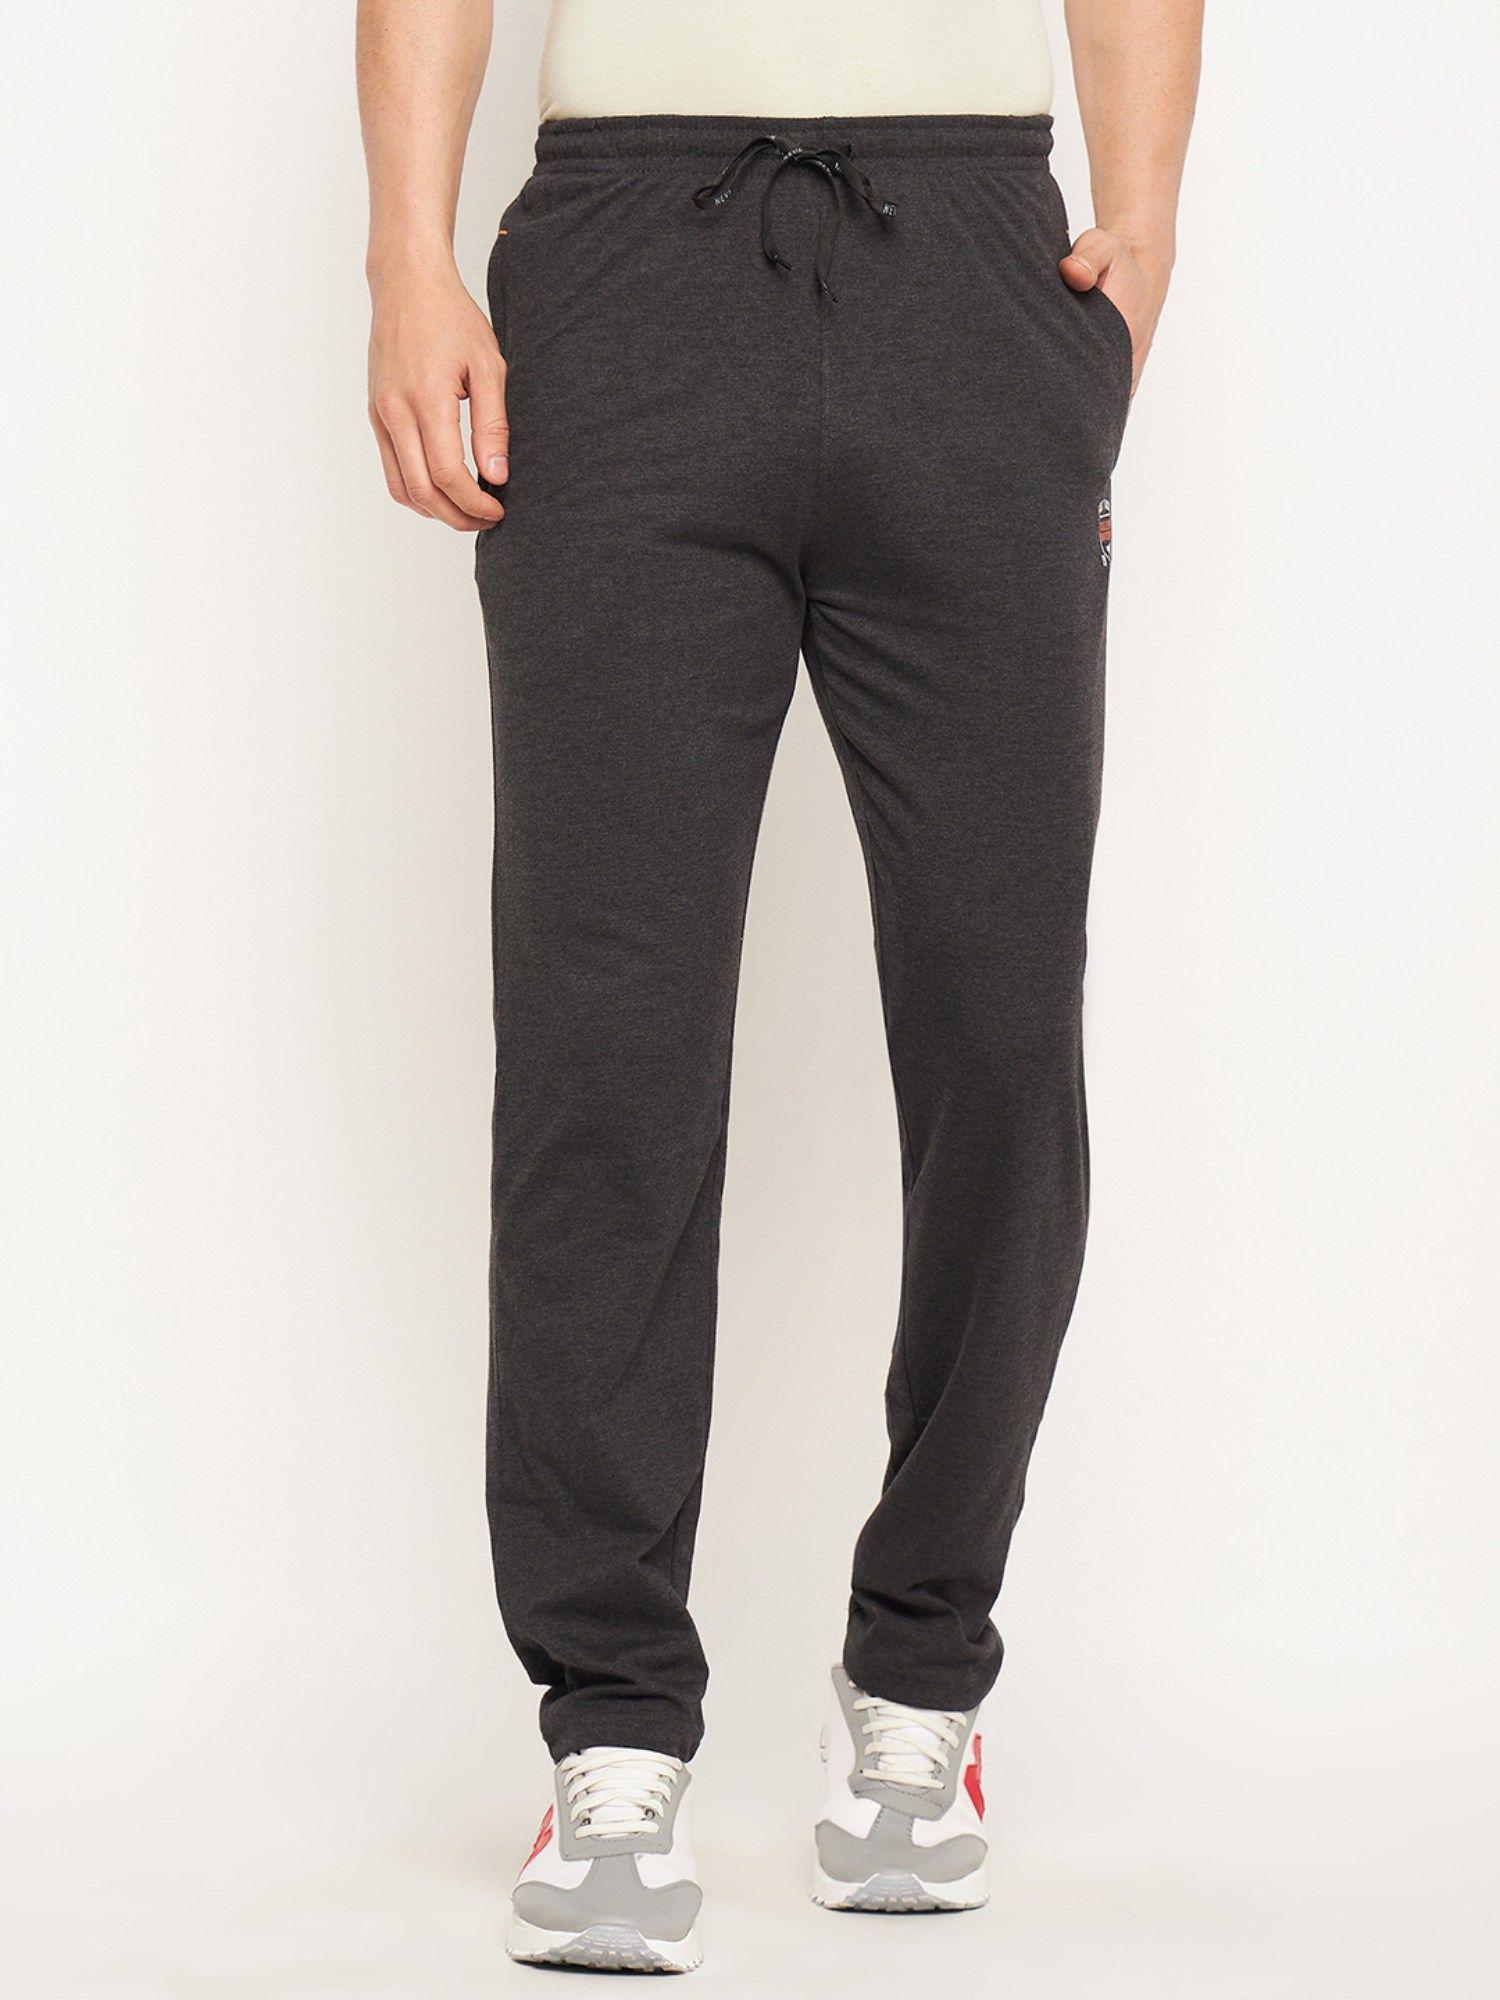 black elasticated waistband with drawstring regular fit mens trackpant